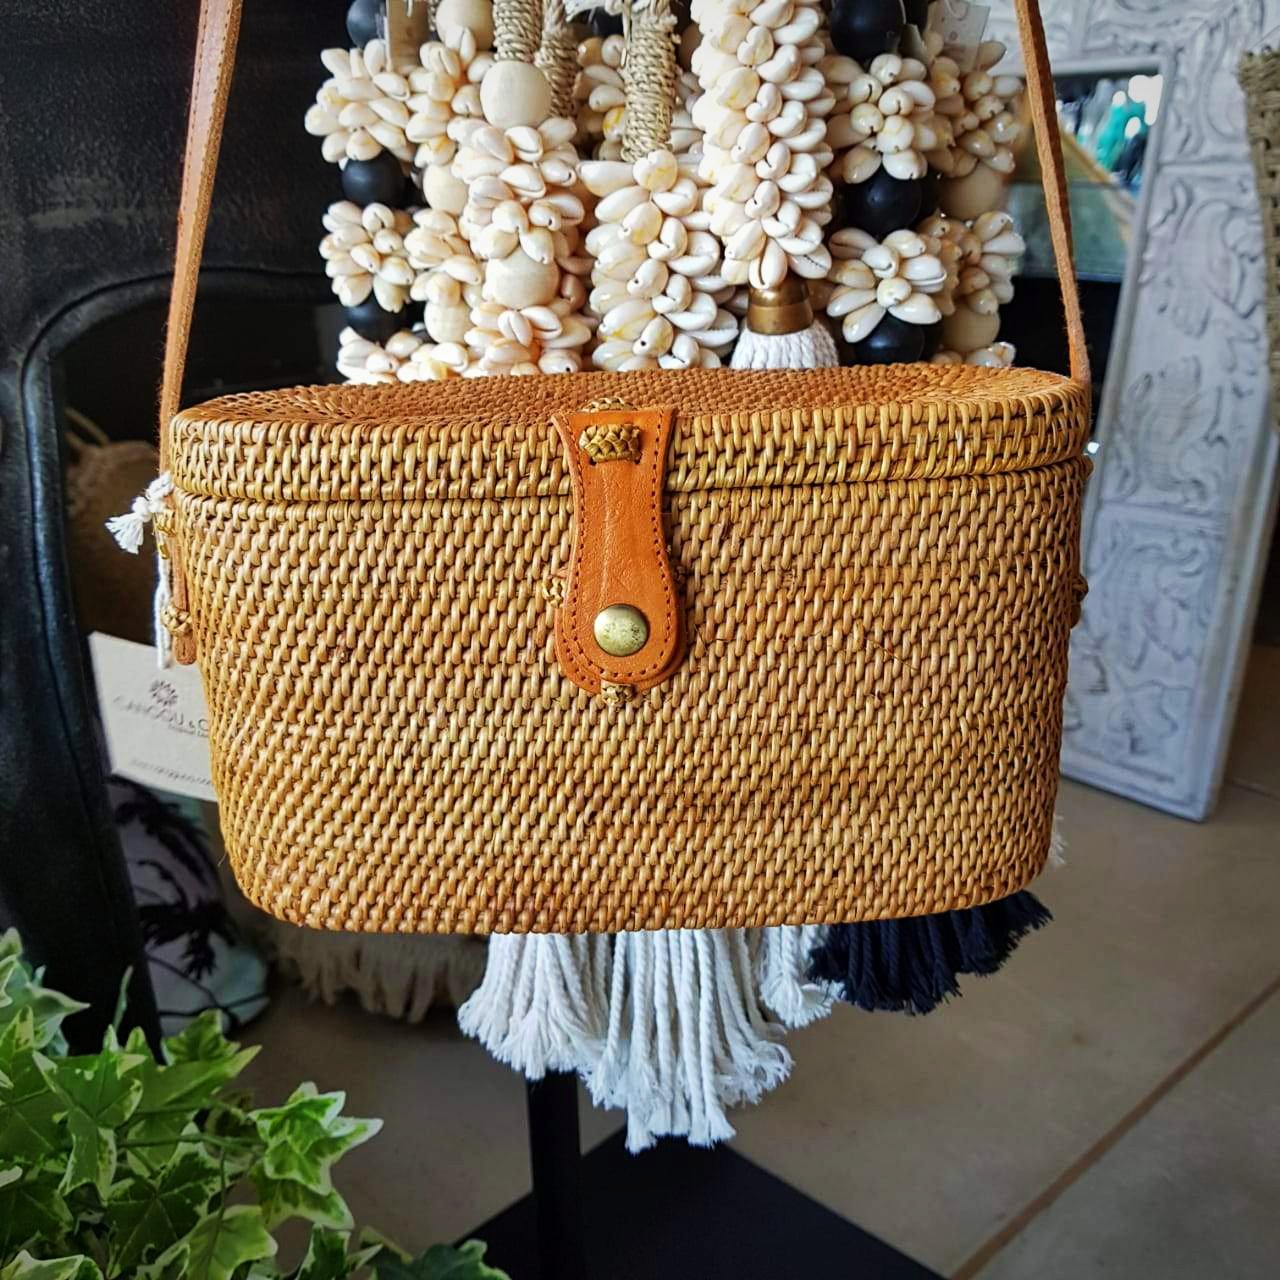 Woven Natural Rattan Cylinder Shaped Bag With Leather Strap